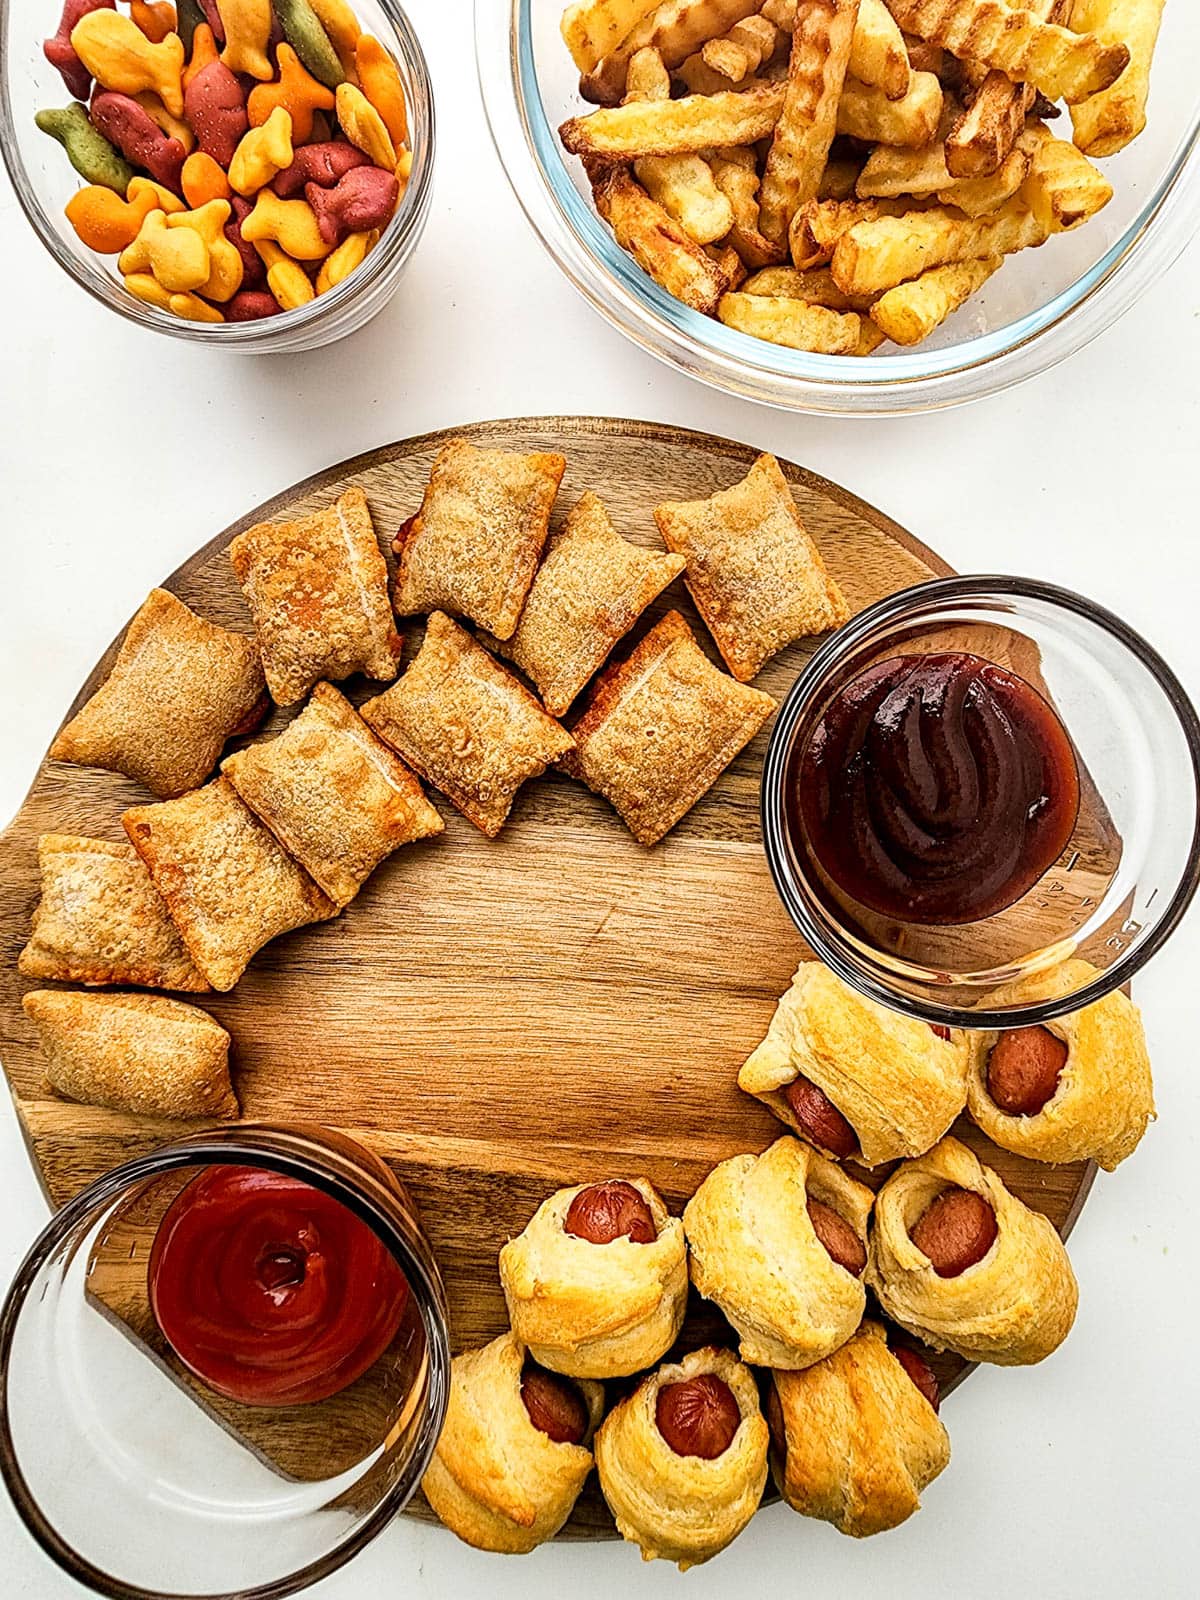 Pigs in a blanket on wooden board with pizza rolls